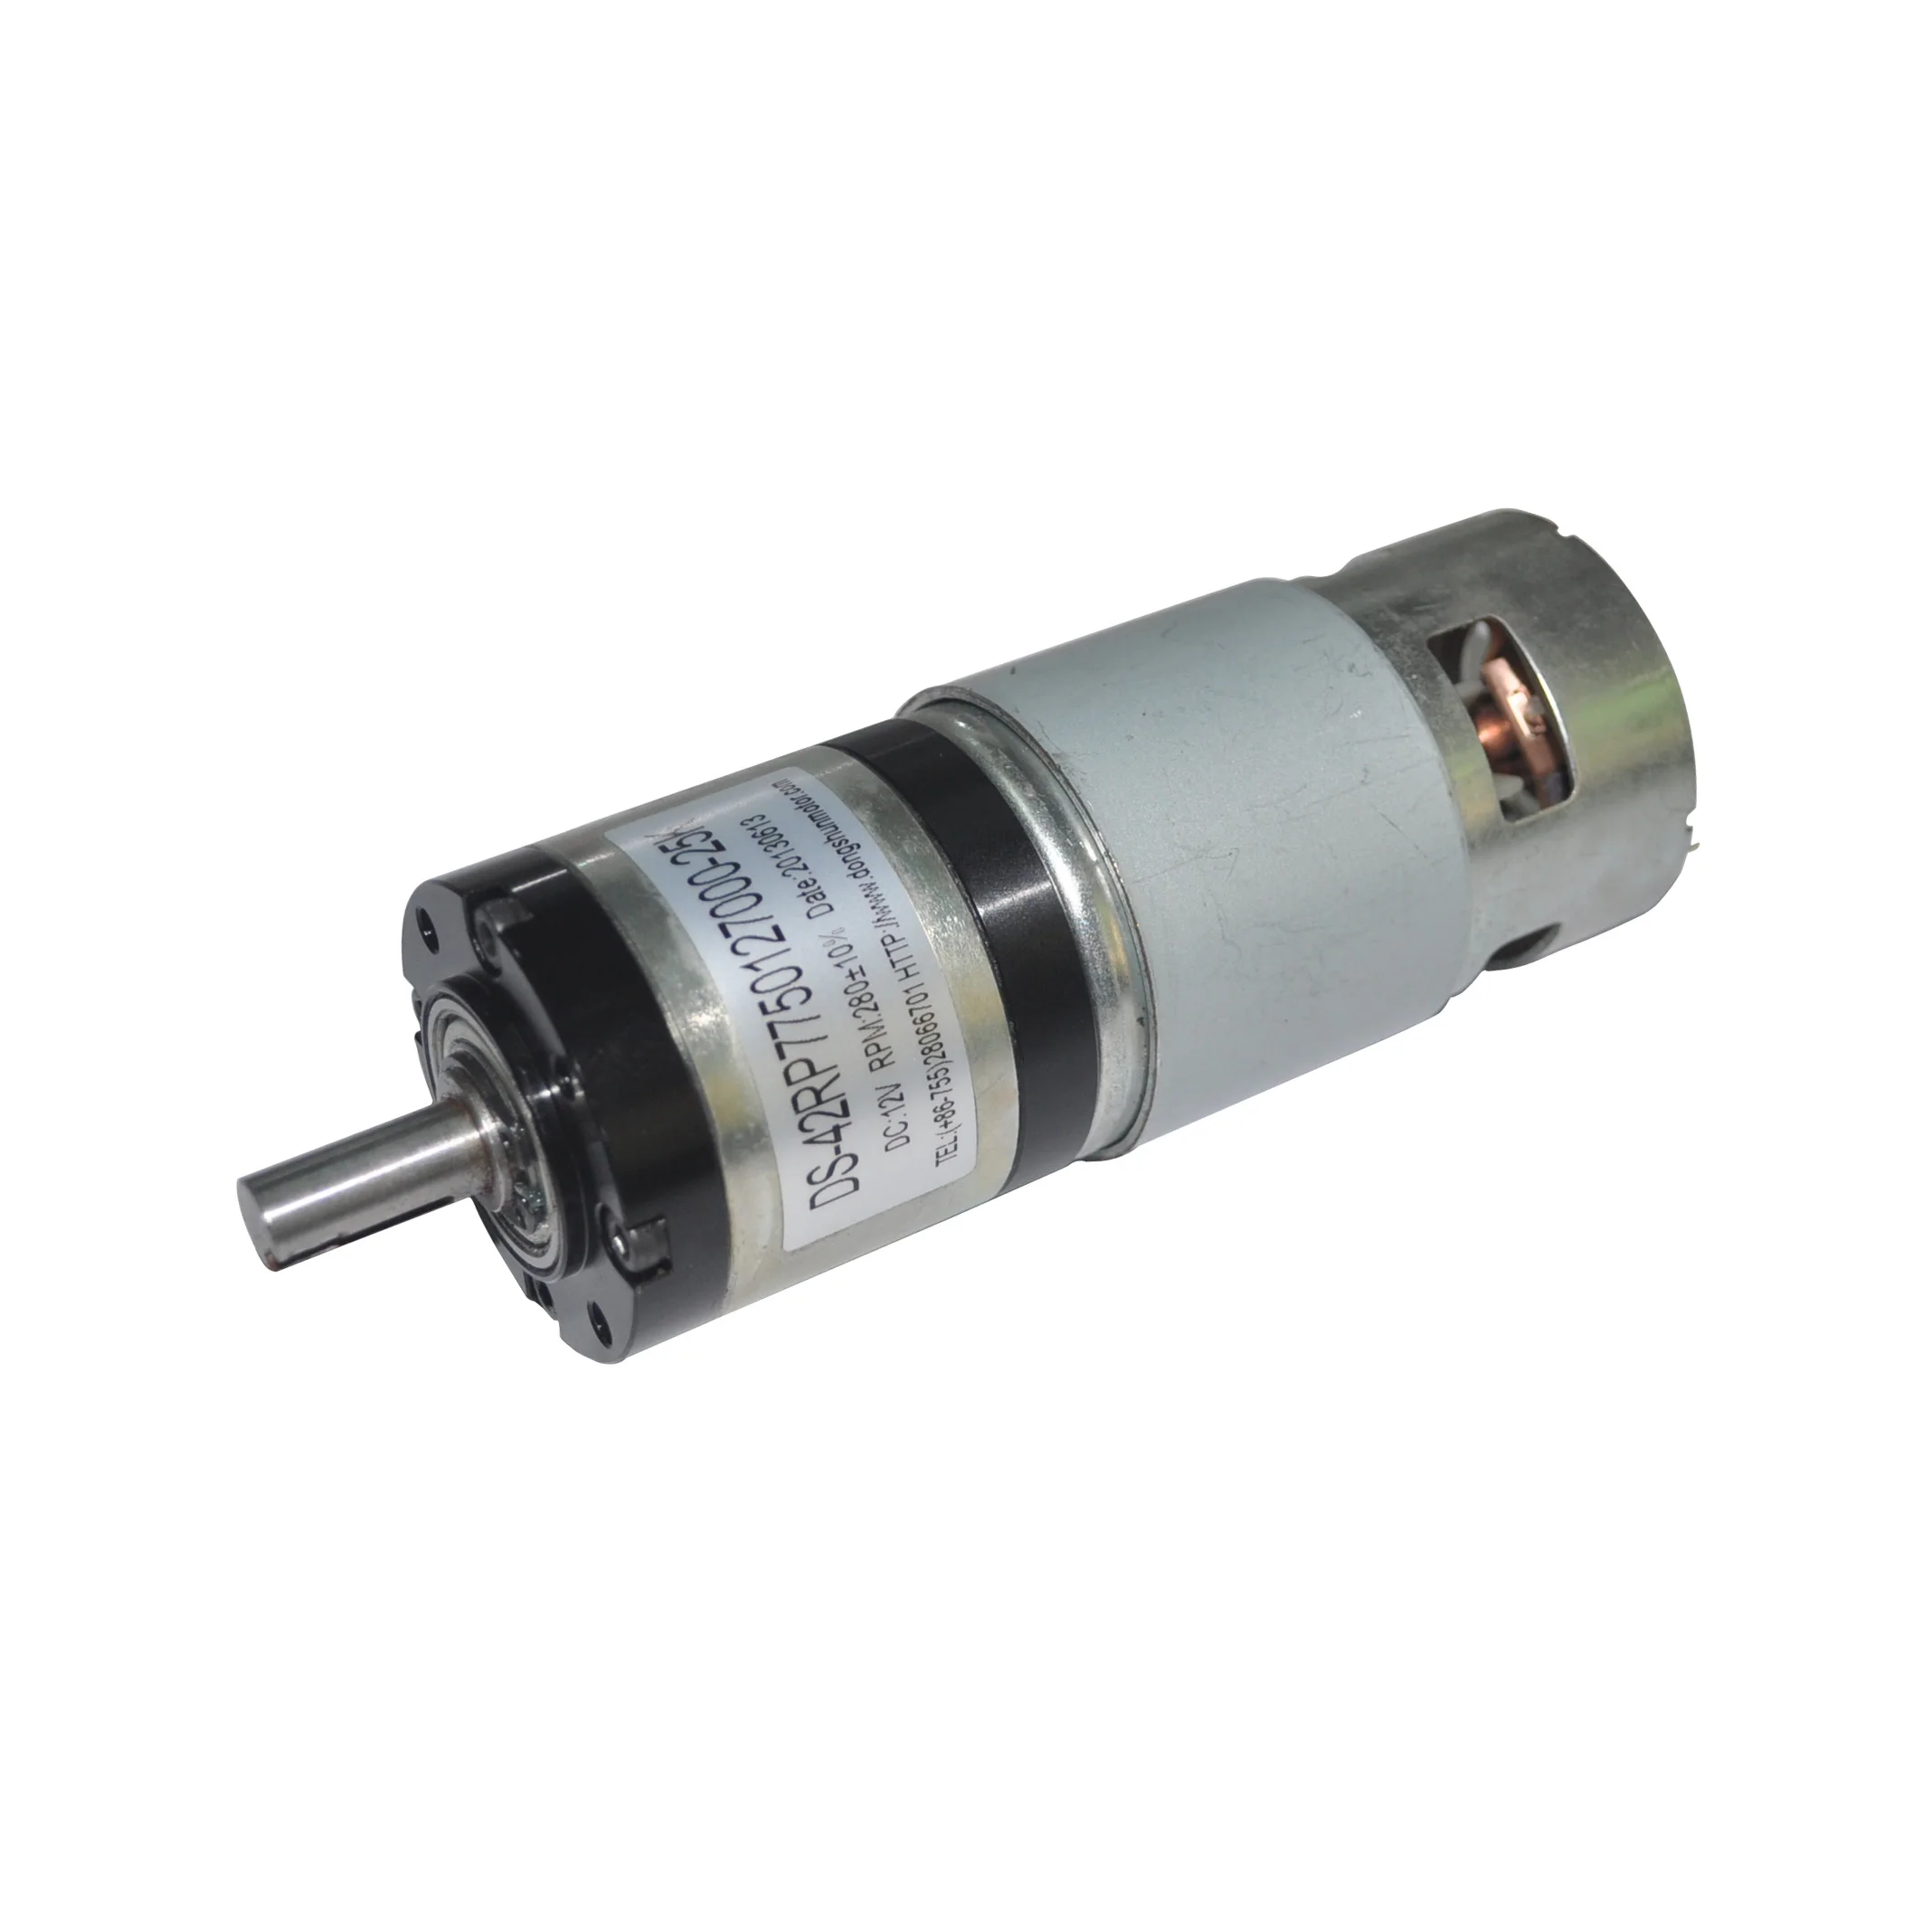 DSD 775 Motor High Speed 10nm Torque DC Motor  With 42mm Planetary Reduction Gearbox